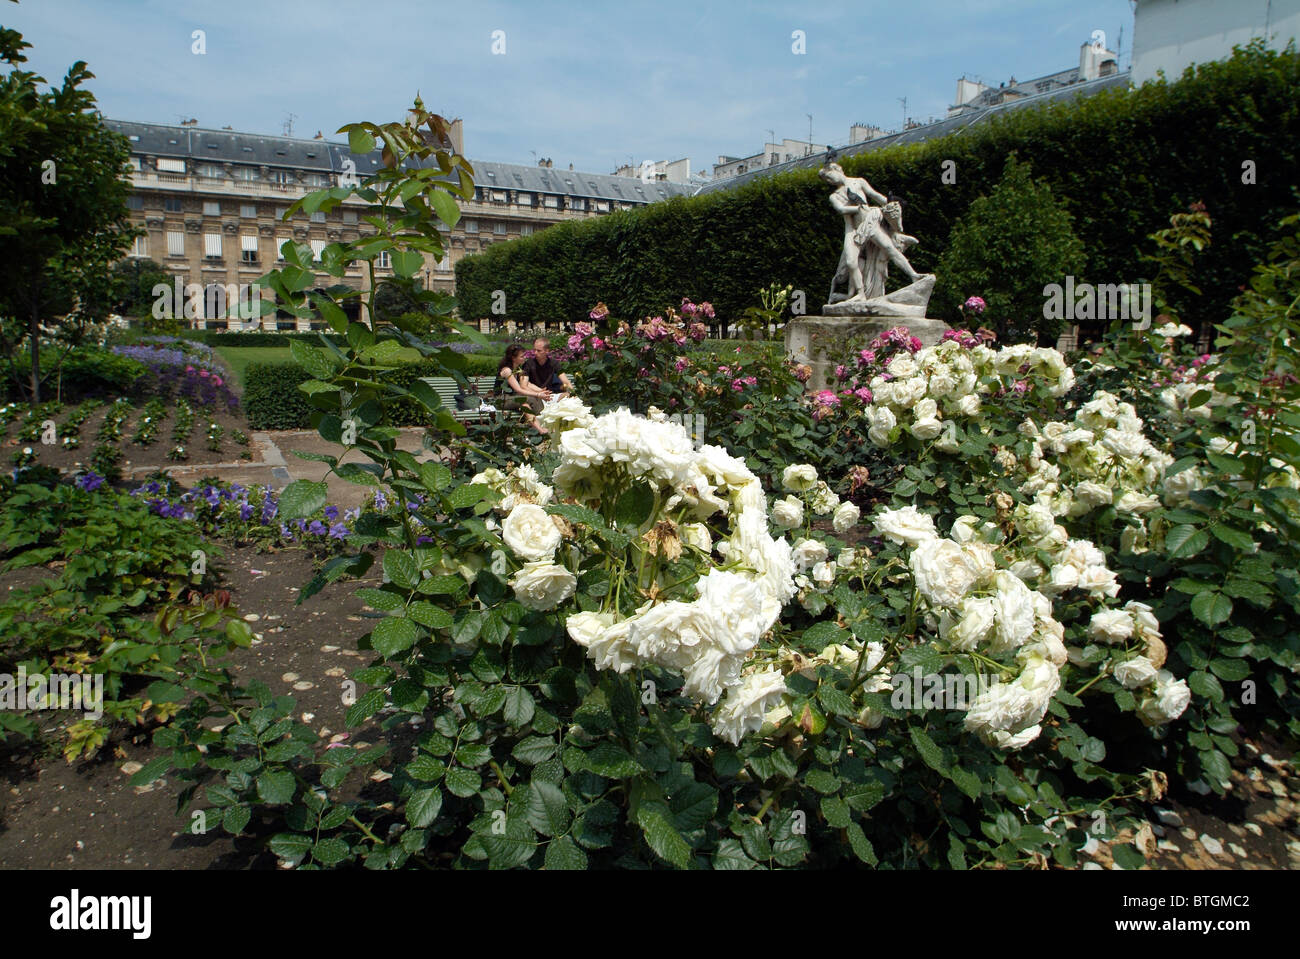 White roses blooming in the garden of Palais Royal, Paris, France Stock Photo